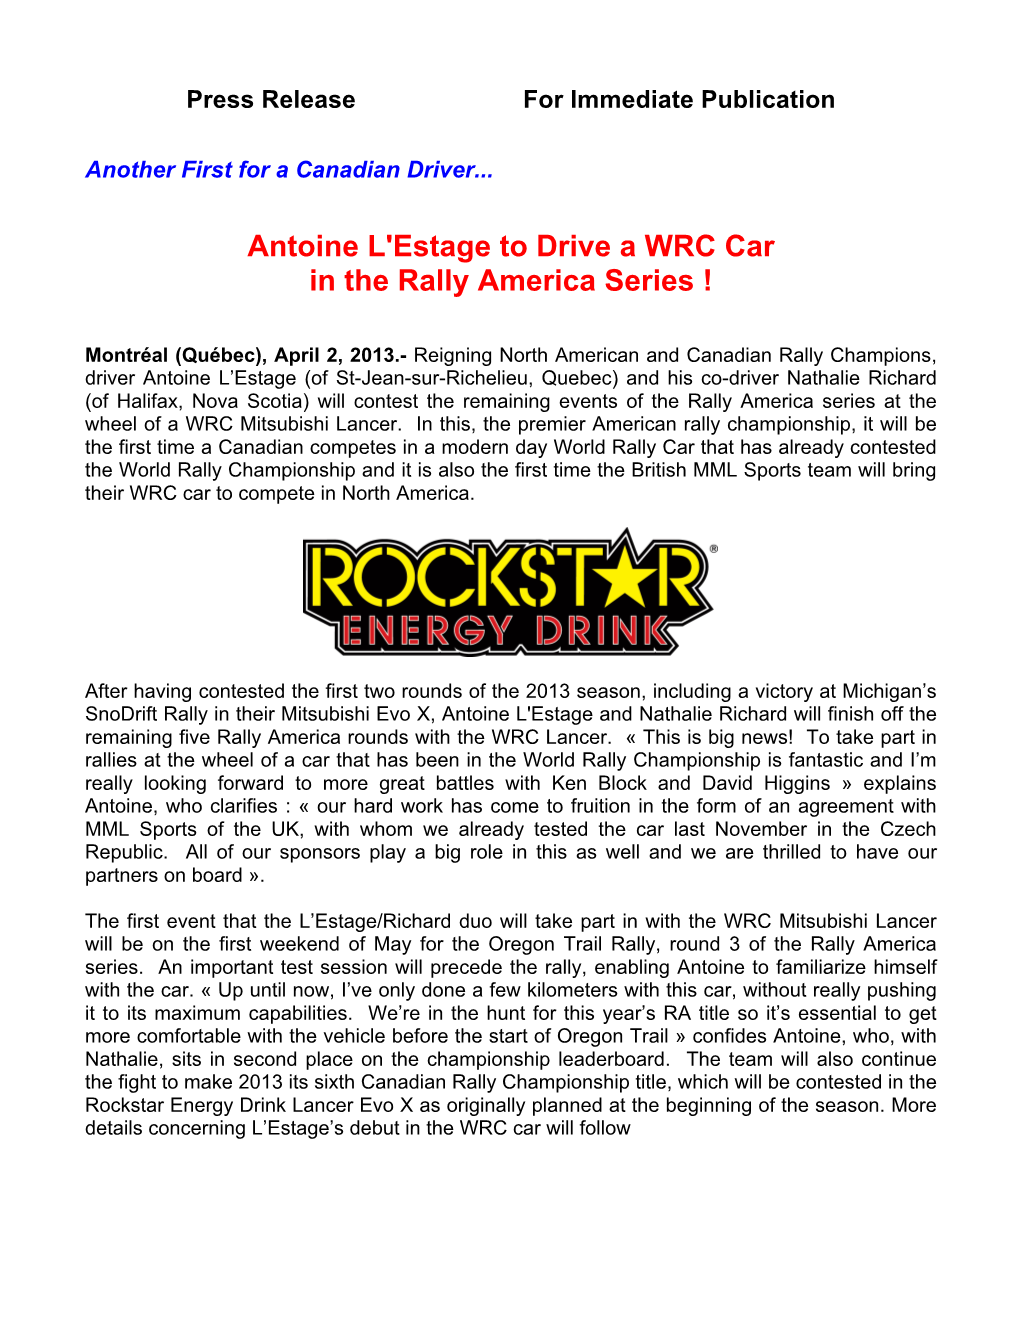 Antoine L'estage to Drive a WRC Car in the Rally America Series !